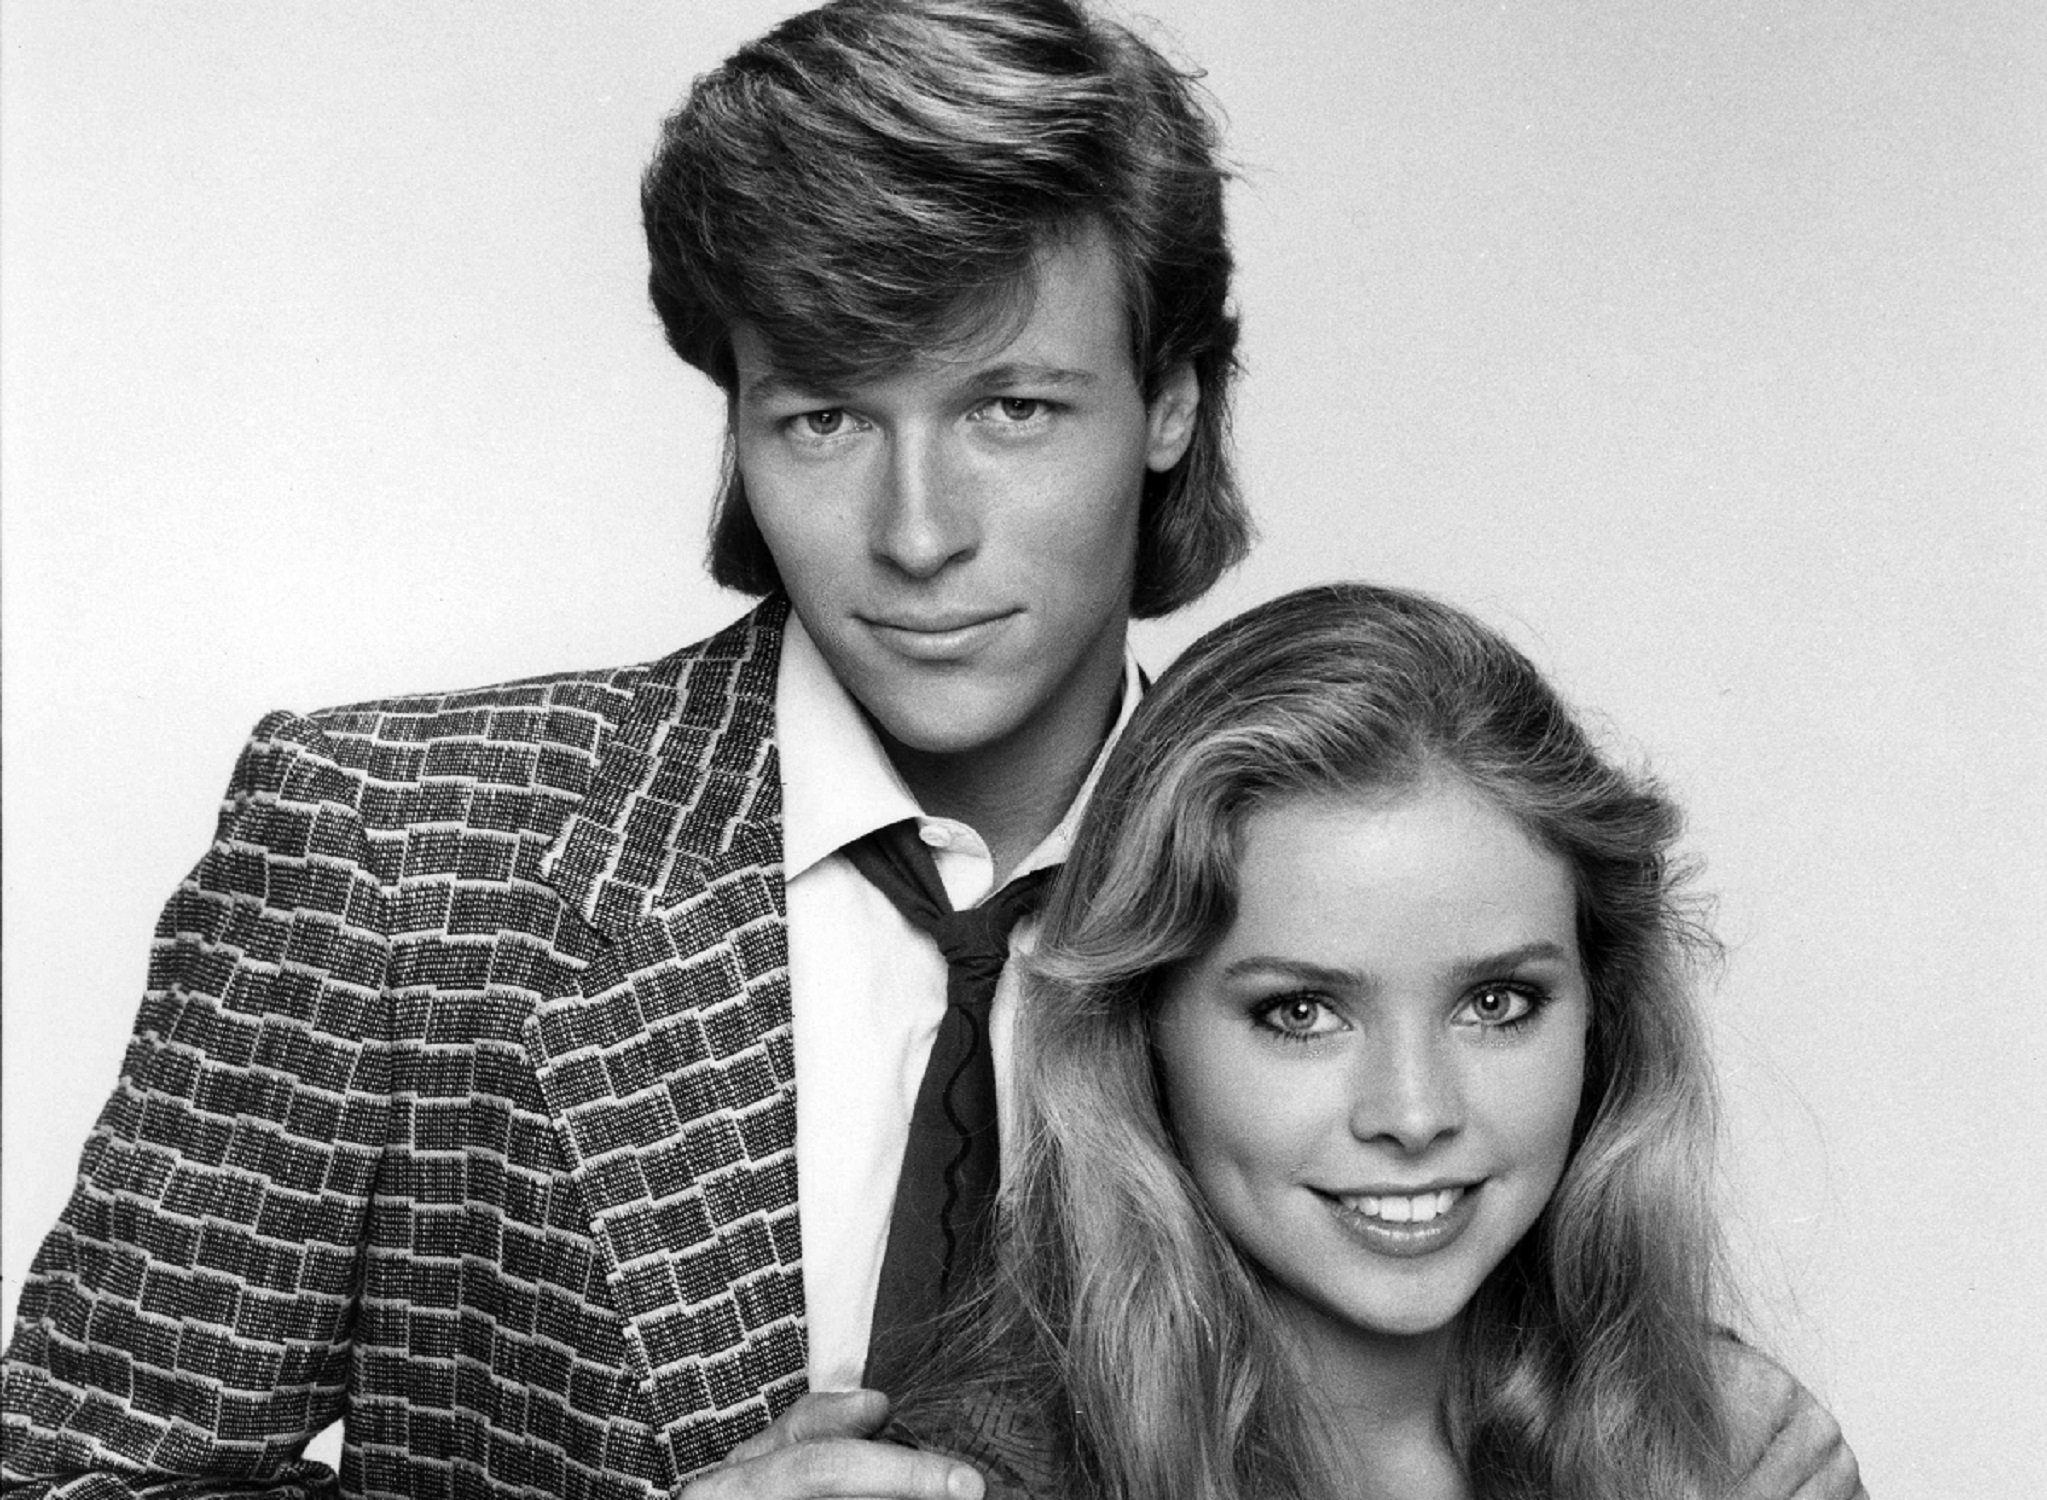 General Hospital hottest couples of all time include Frisco and Felicia